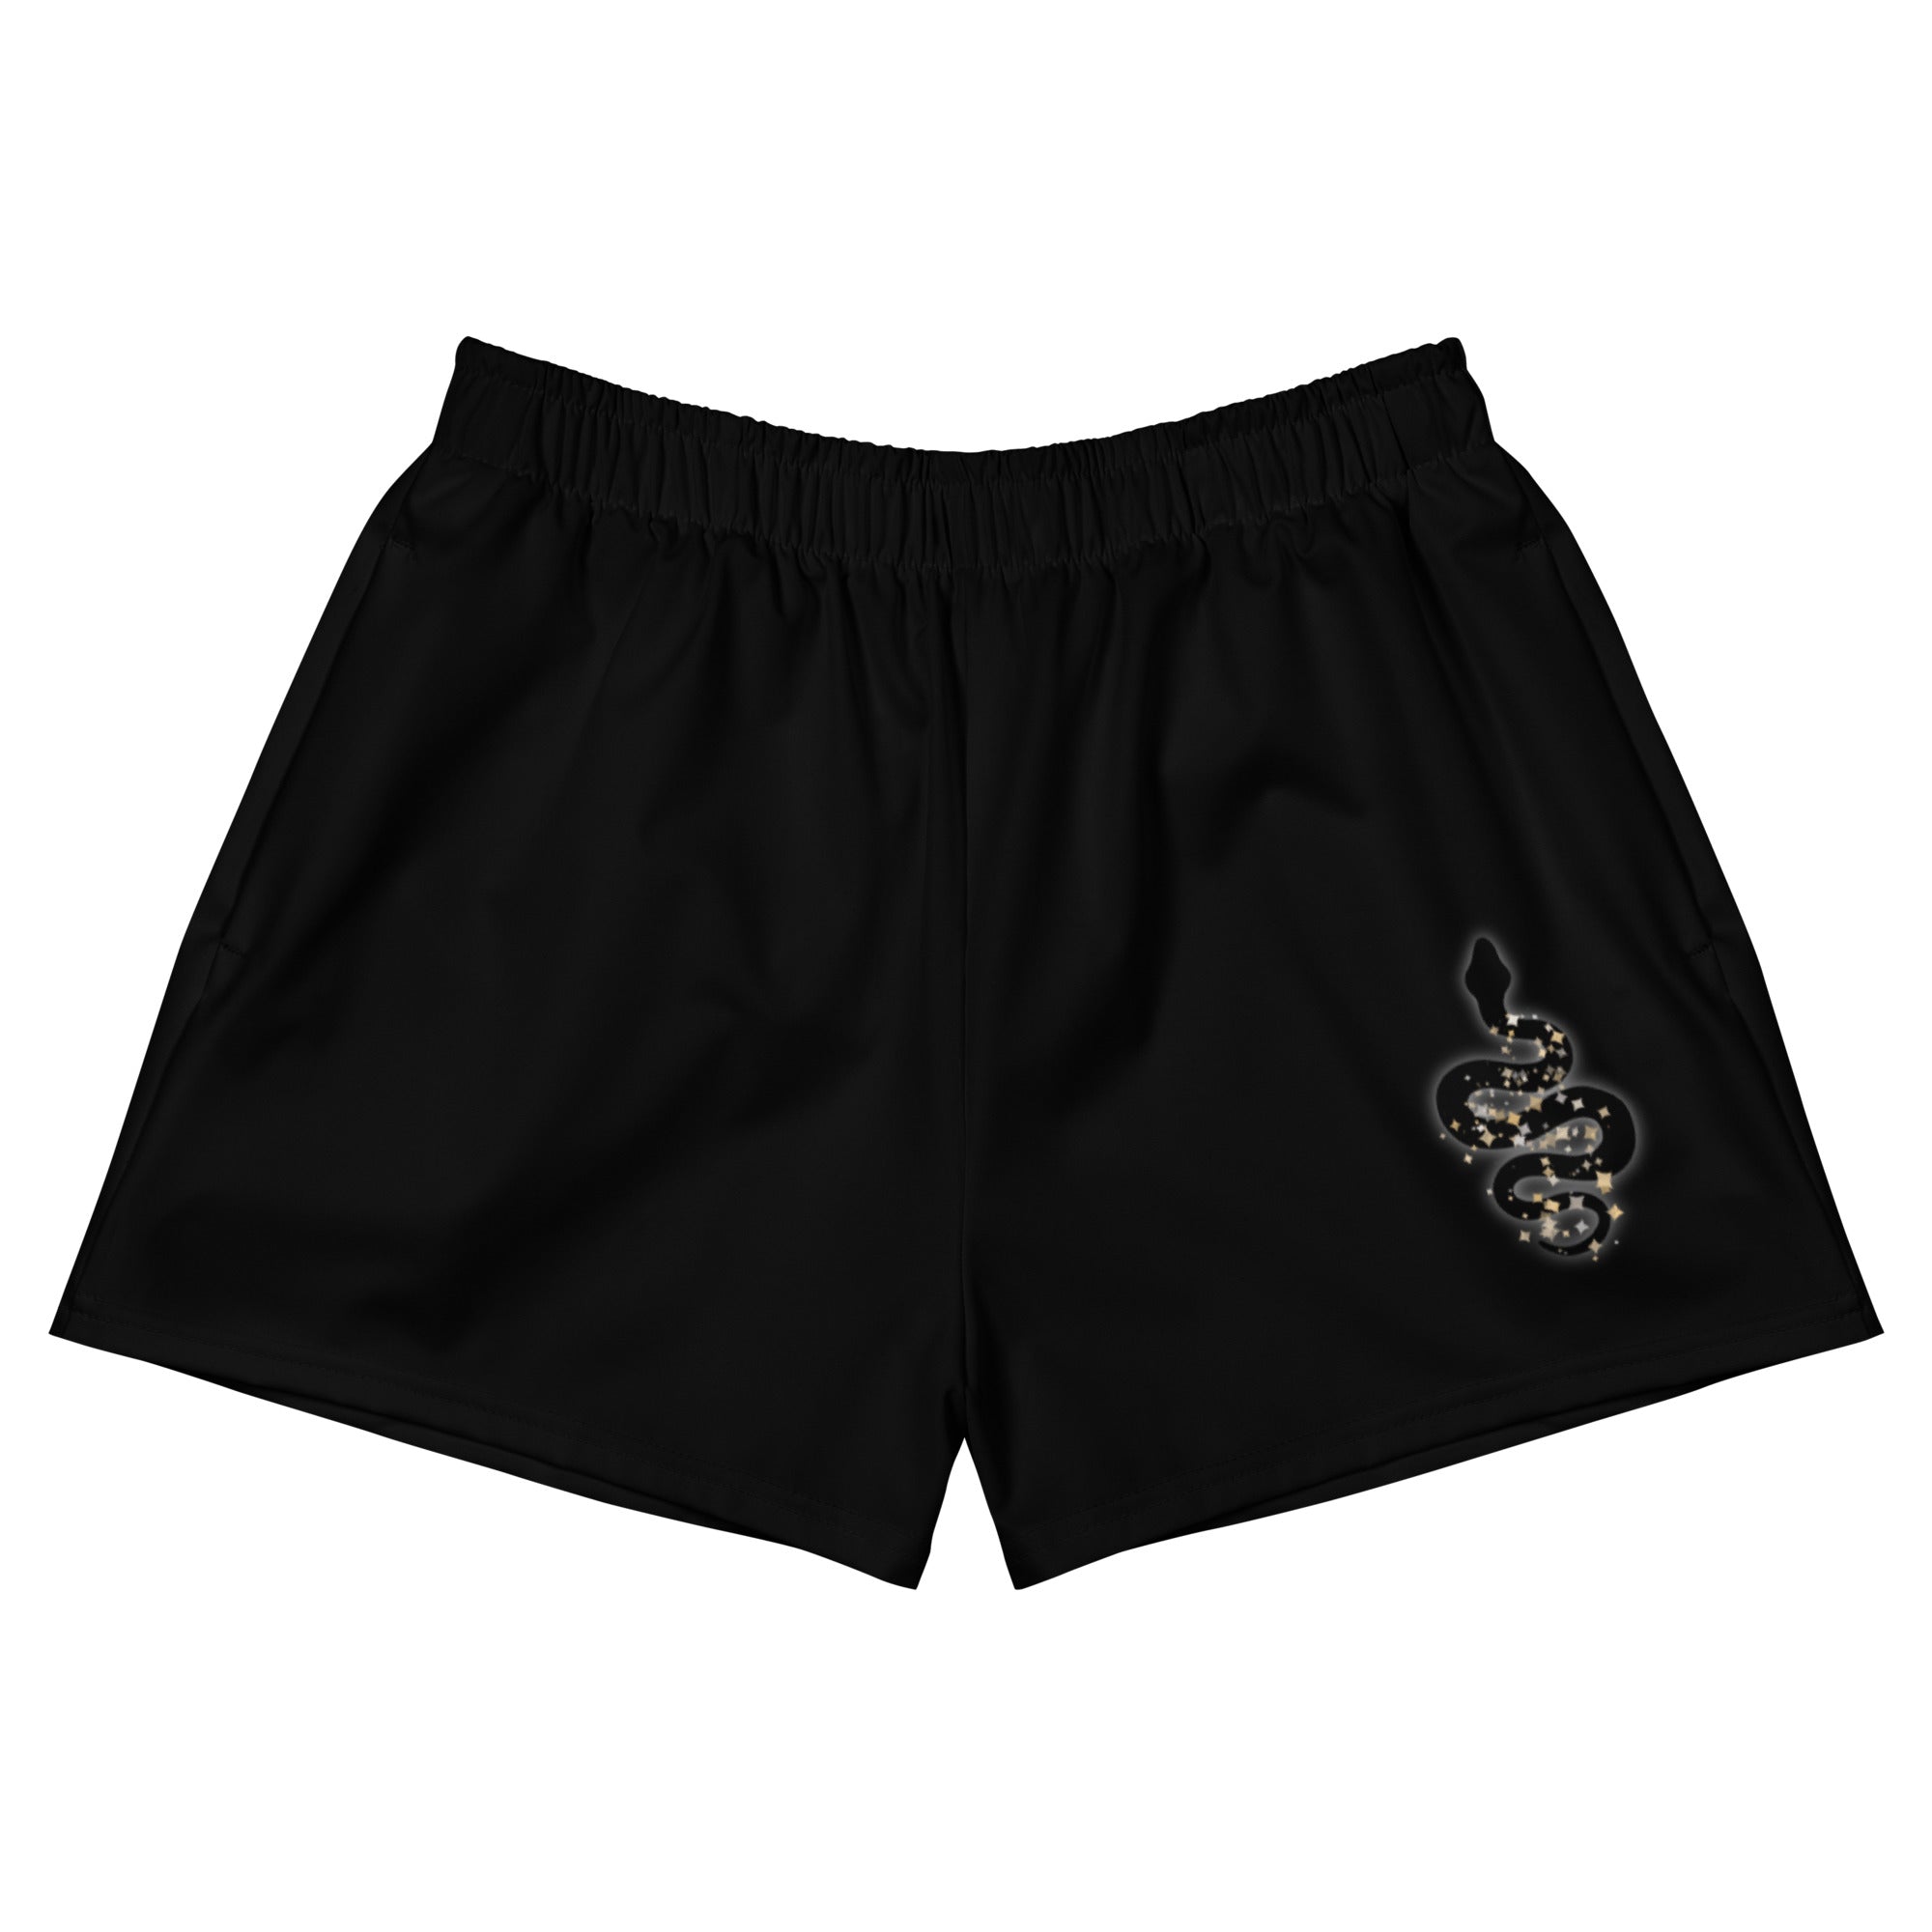 Reputation Women’s Recycled Athletic Shorts